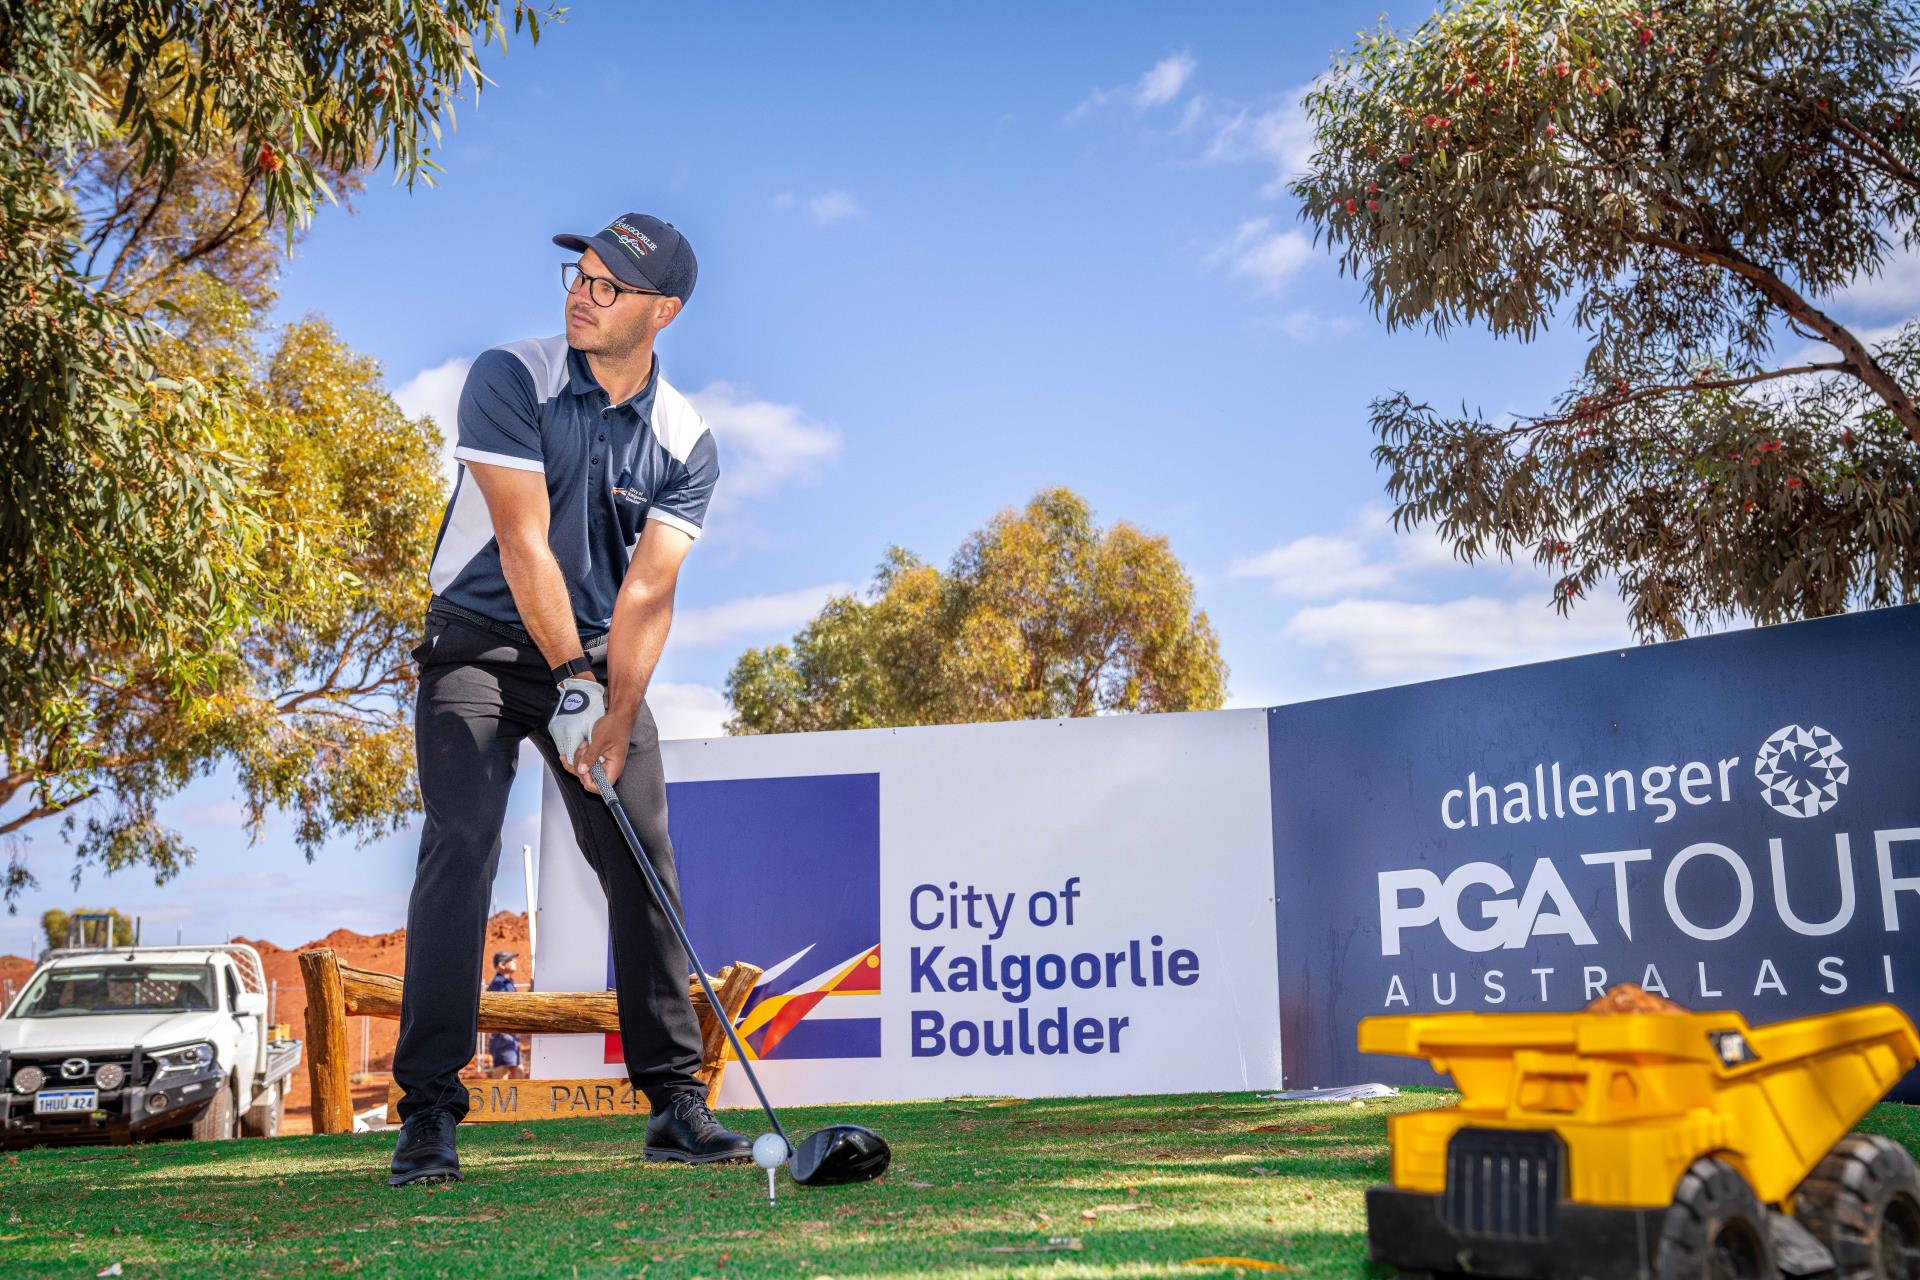 Connor Fewkes endorsed as the first brand ambassador for the Kalgoorlie